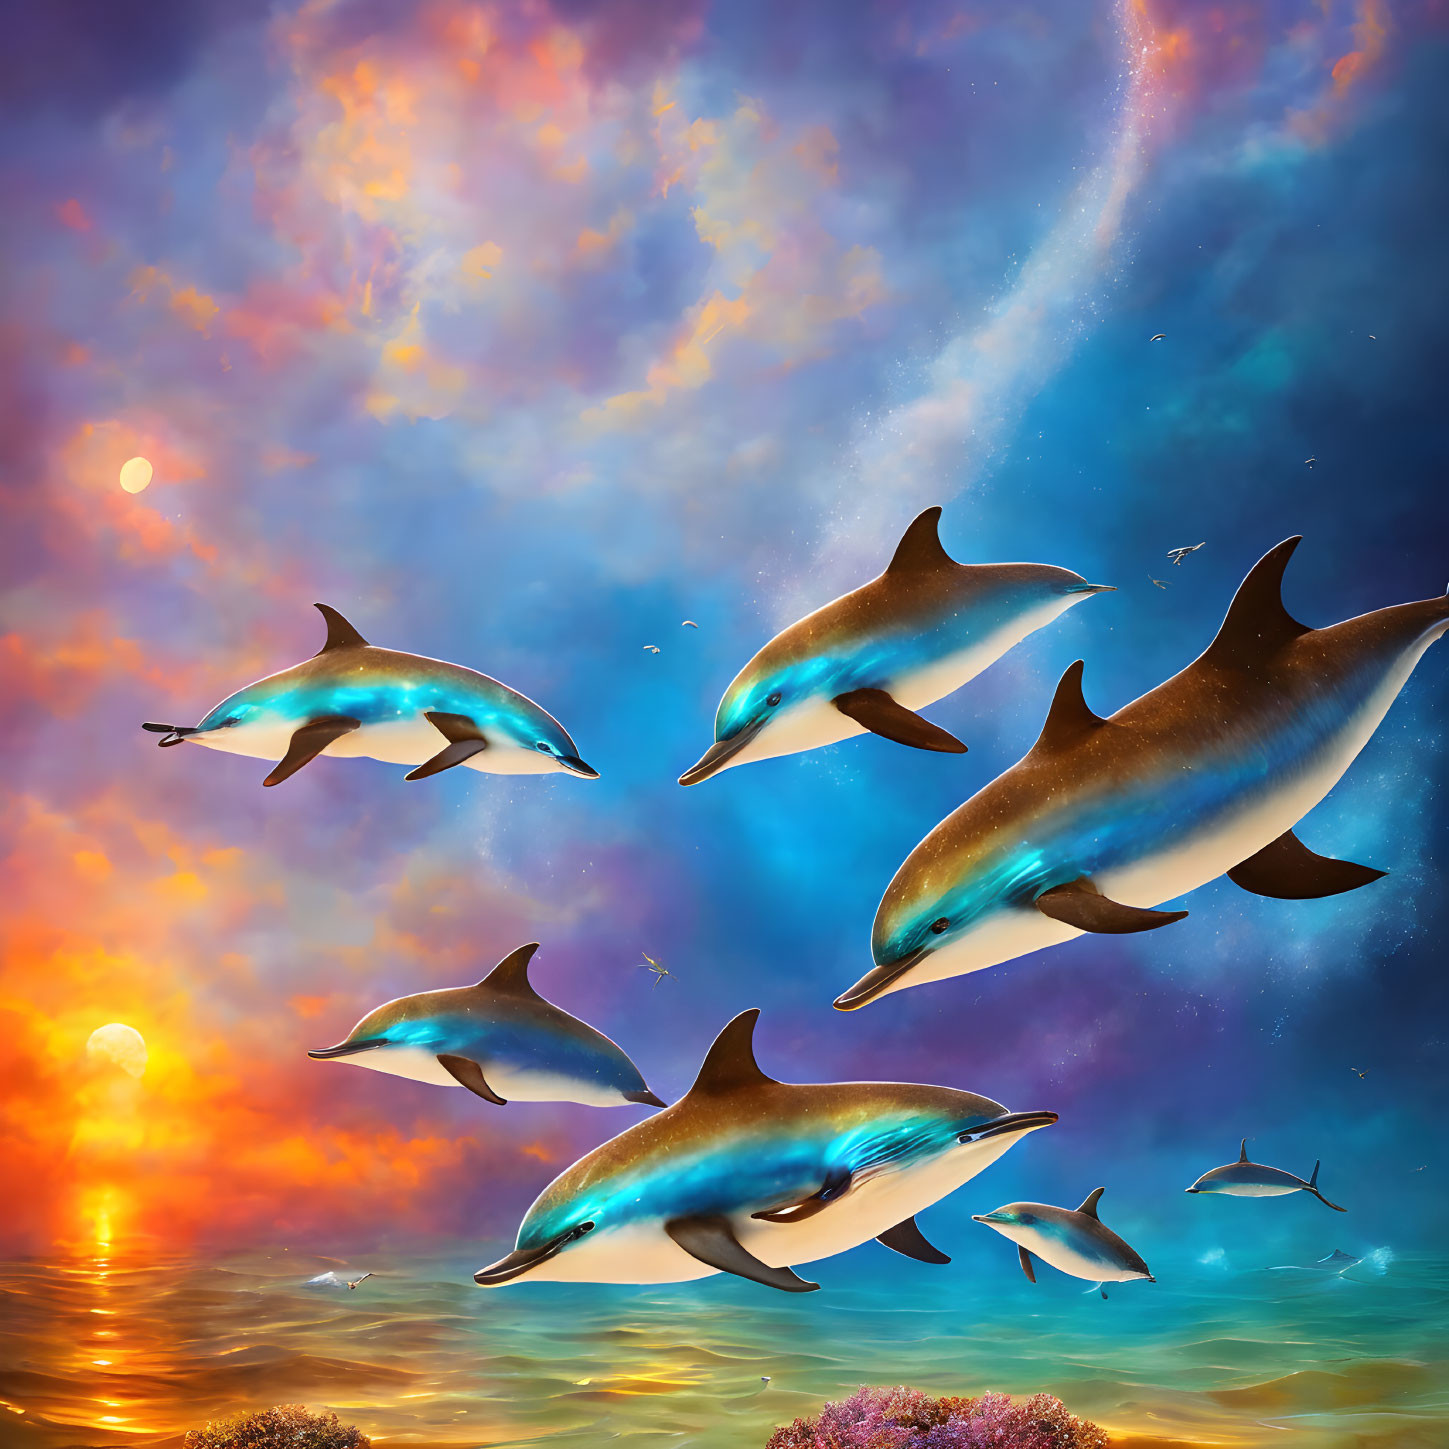 Surreal artwork: Dolphins leaping under starry sky reflected in water.